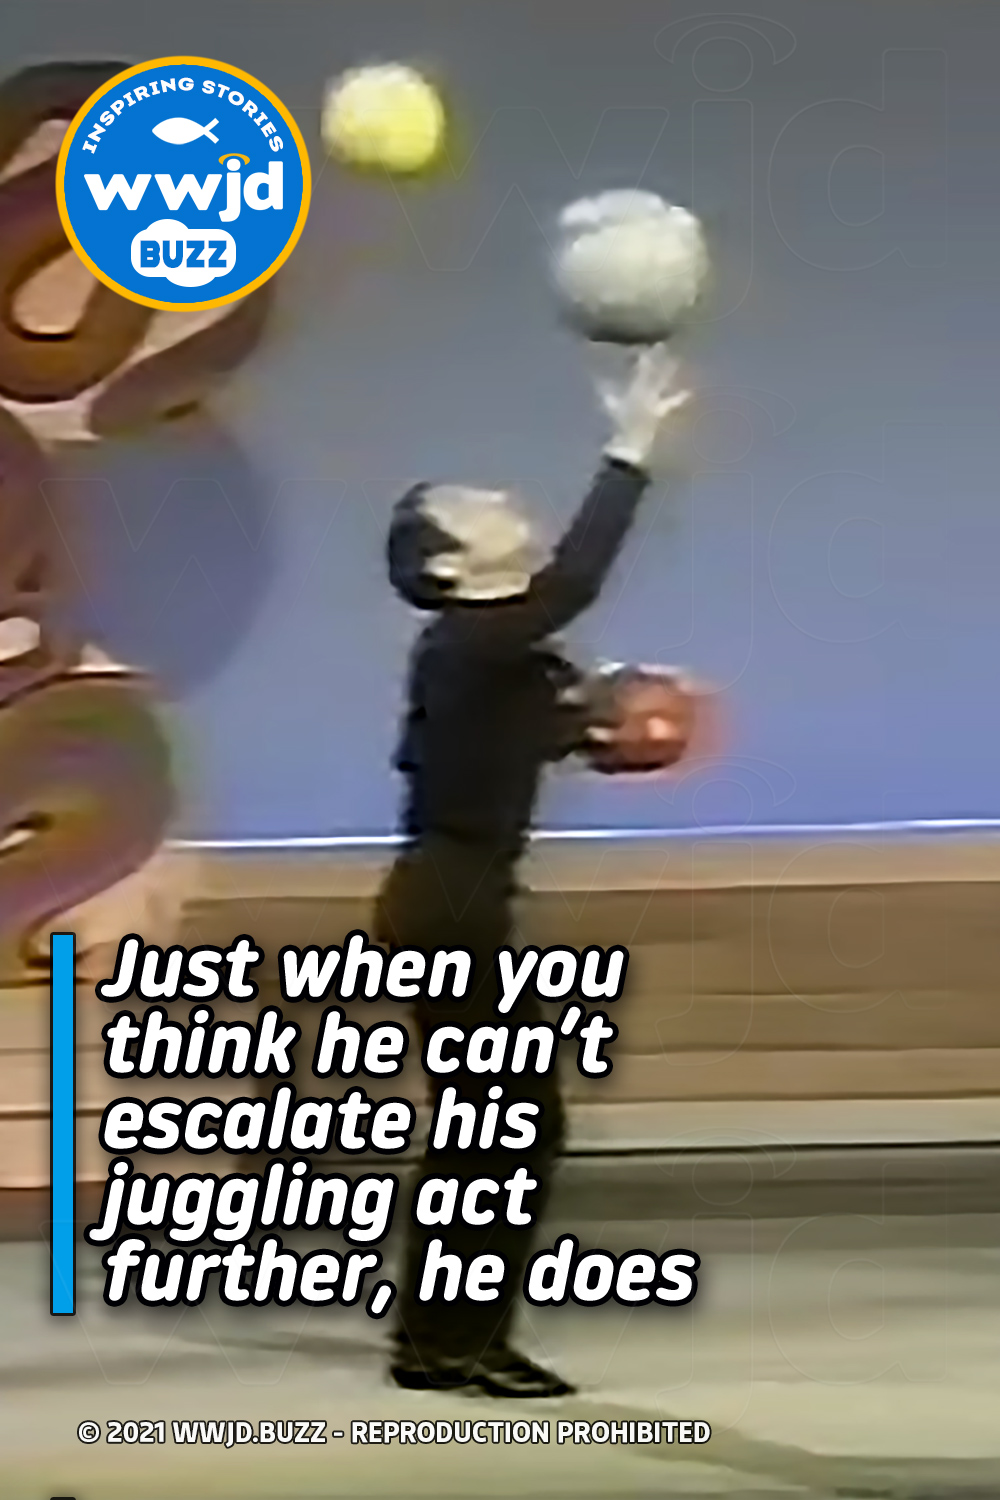 Just when you think he can’t escalate his juggling act further, he does